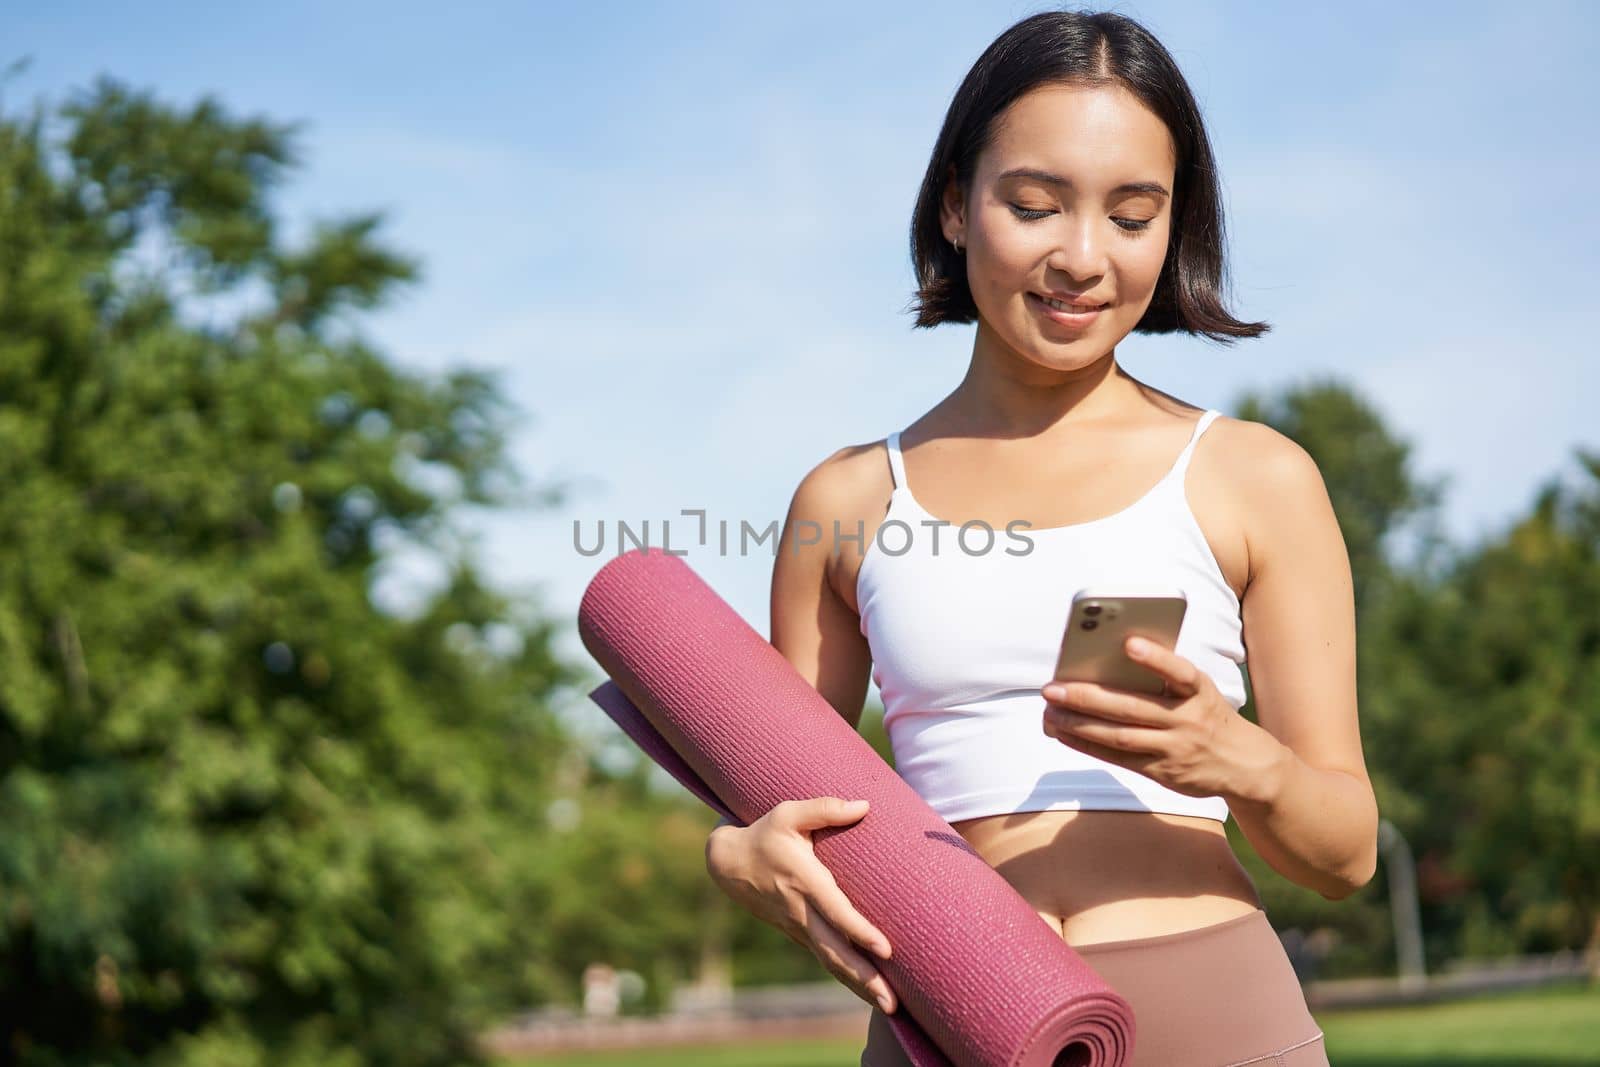 Portrait of young asian woman checking her phone during workout, walking in park with rubber mat, going to the gym, holding smartphone.